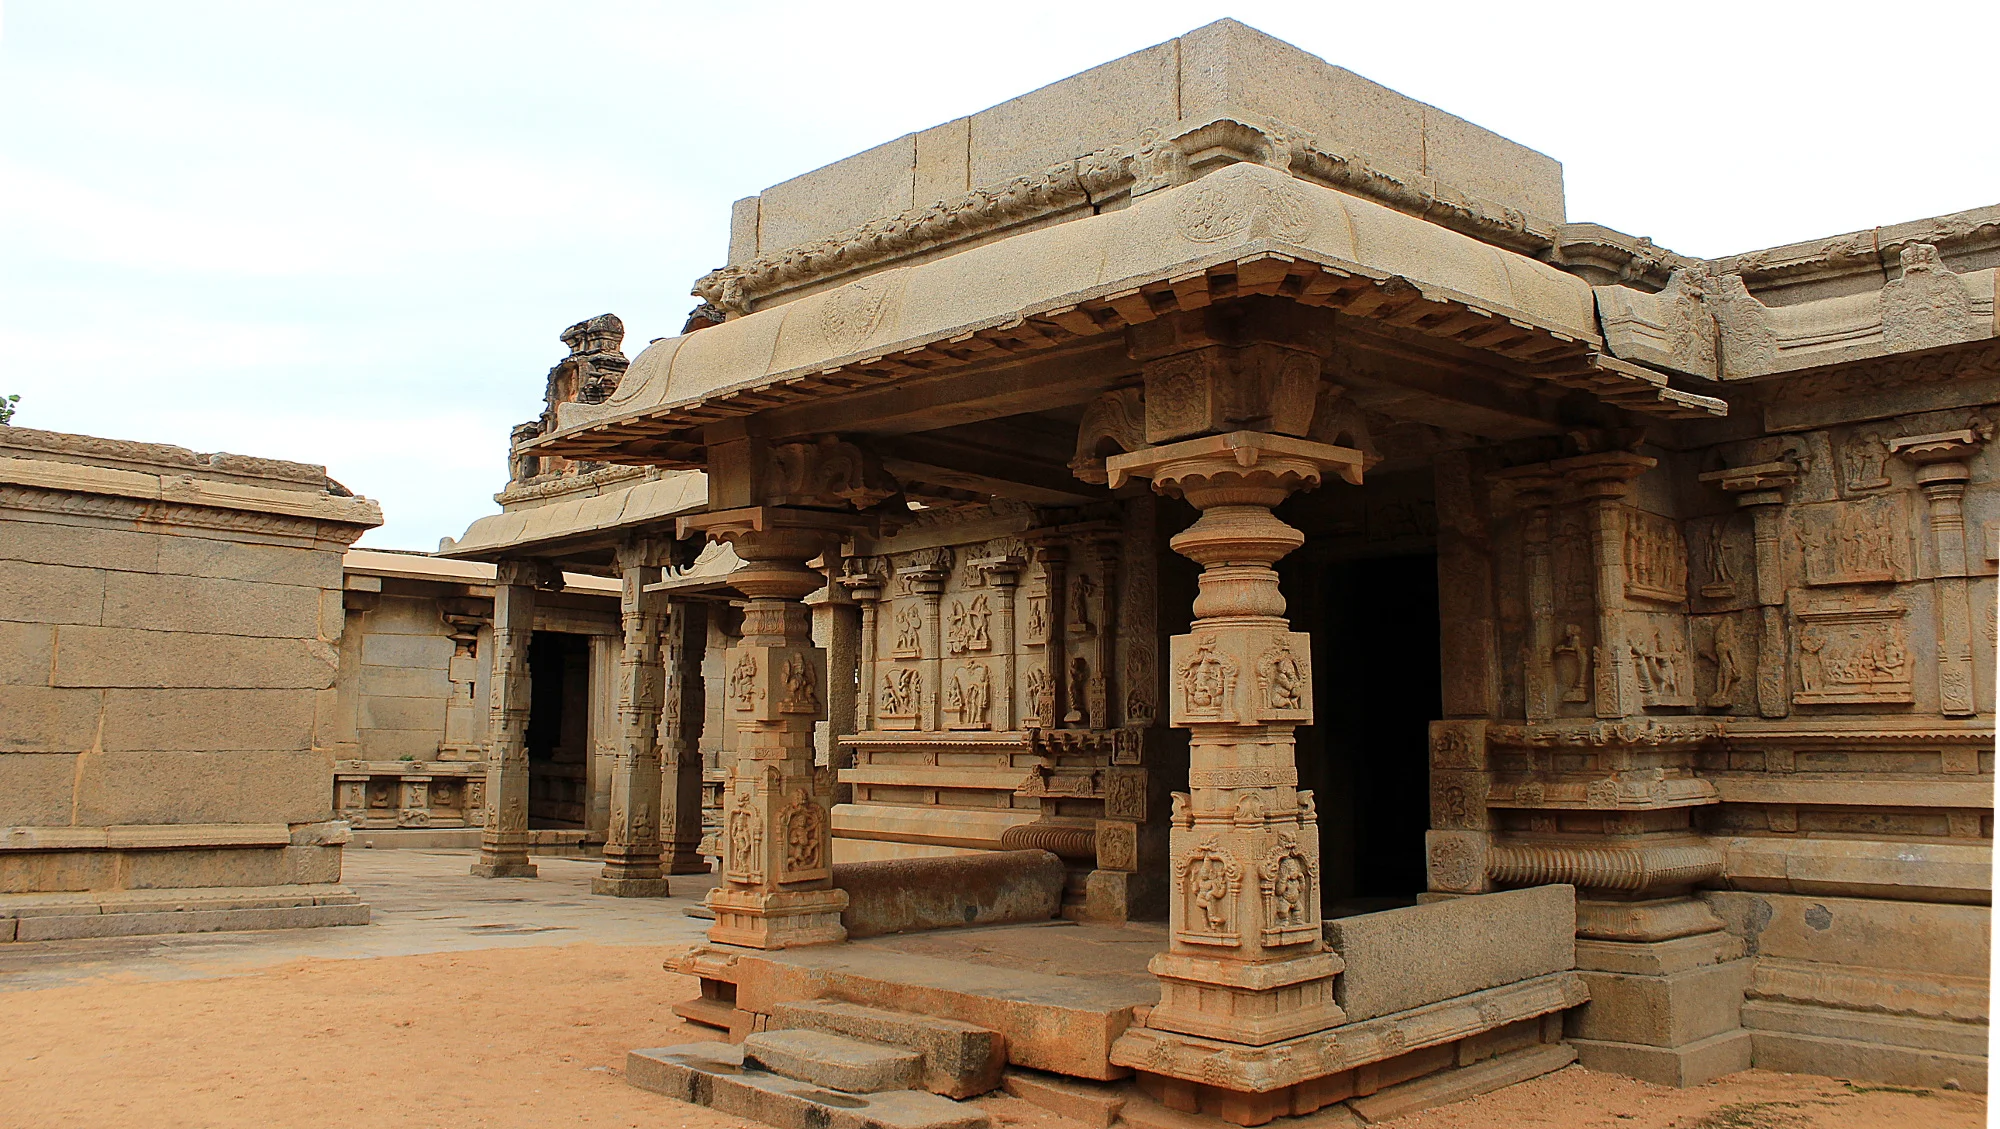 The ruins of Hampi. Light brown exterior of the Hazarama Temple with carved pillars.